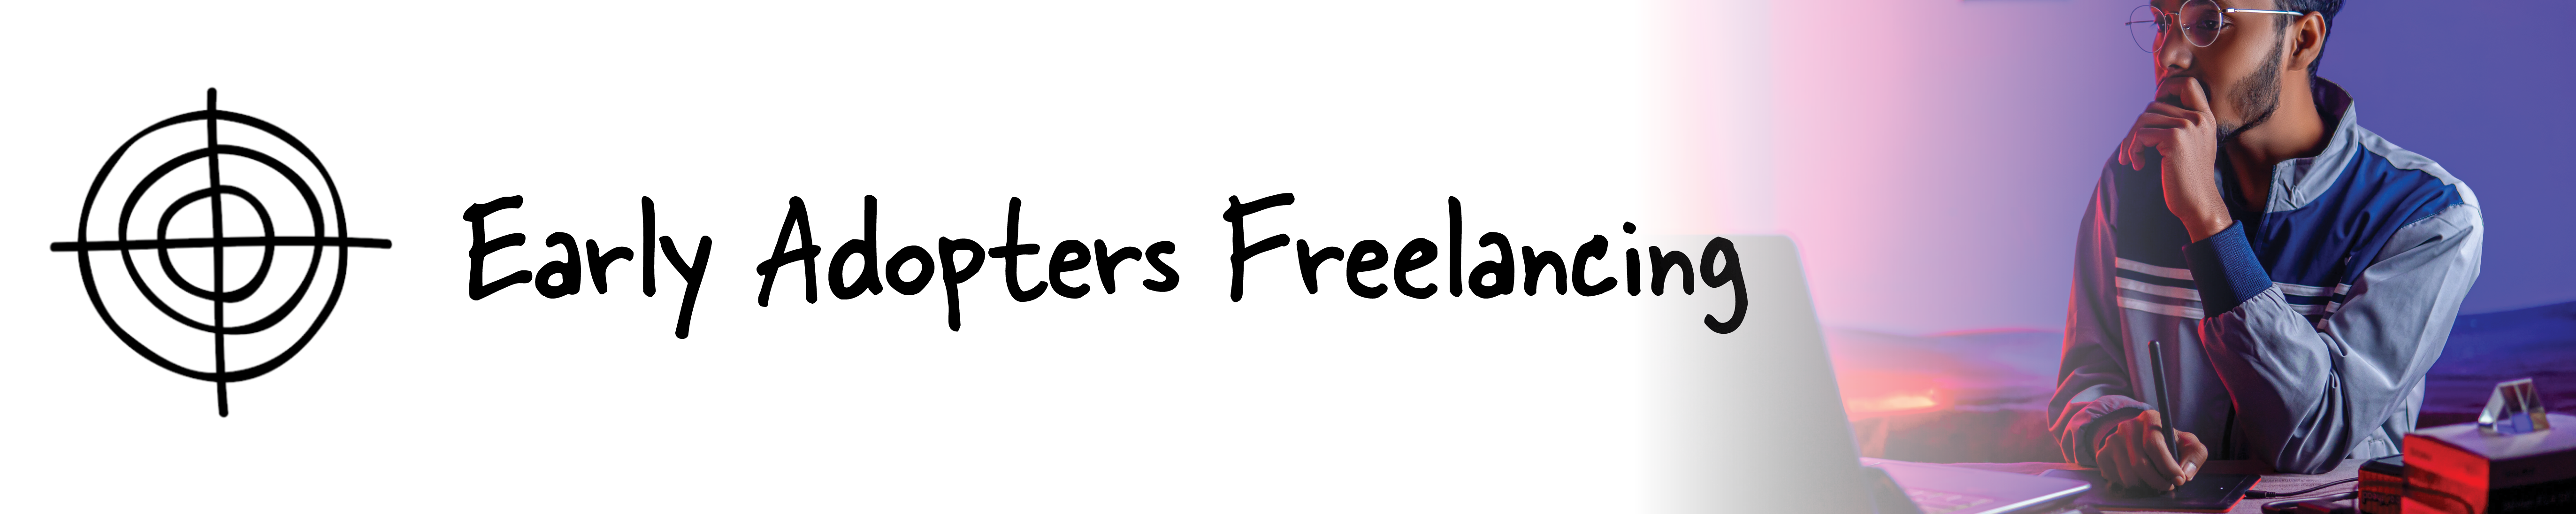 Early Adopters Freelancing